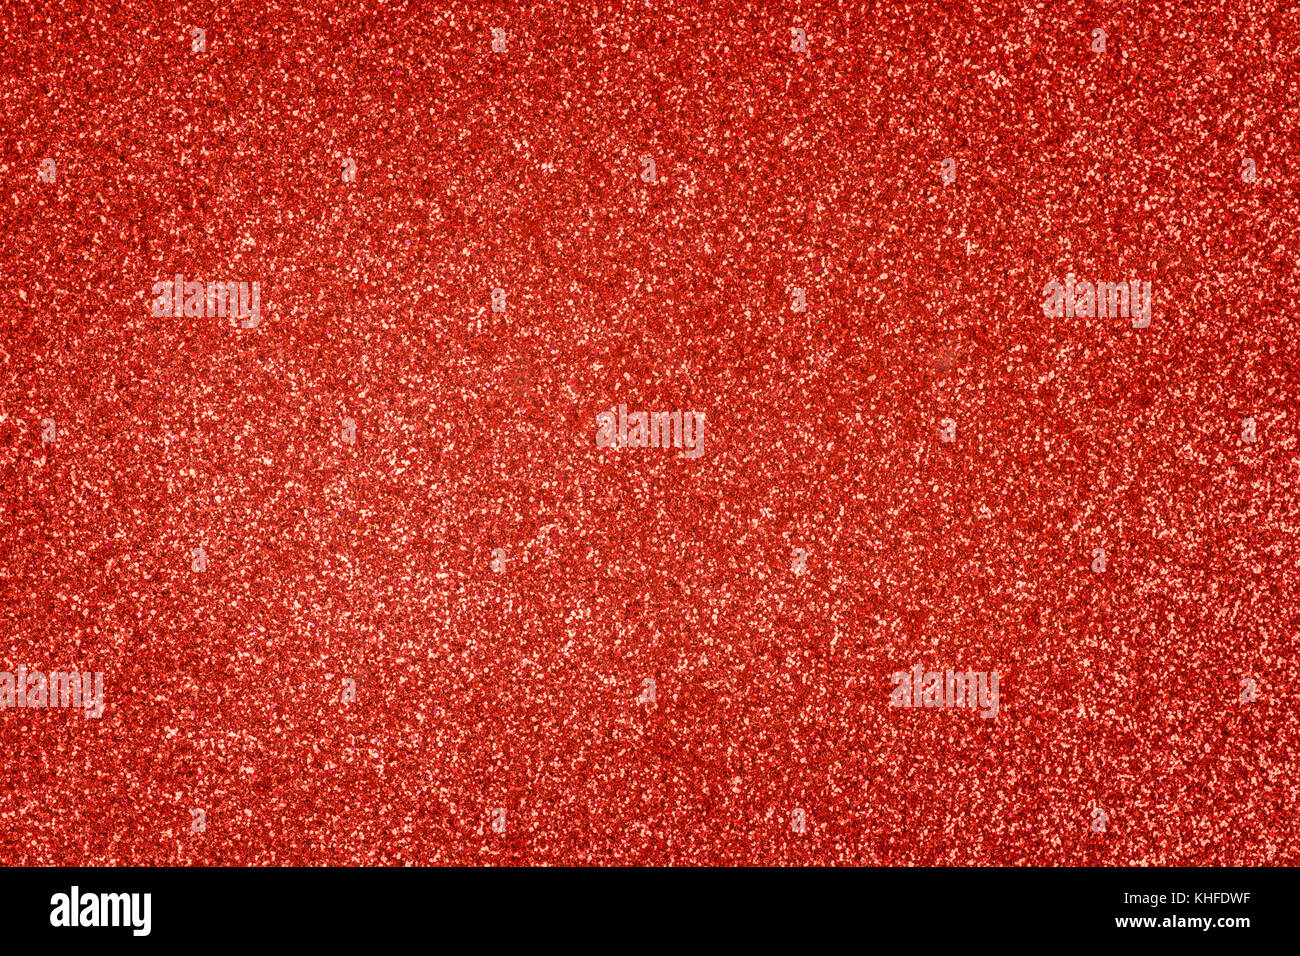 Red glitter surface close up. Background and texture Stock Photo